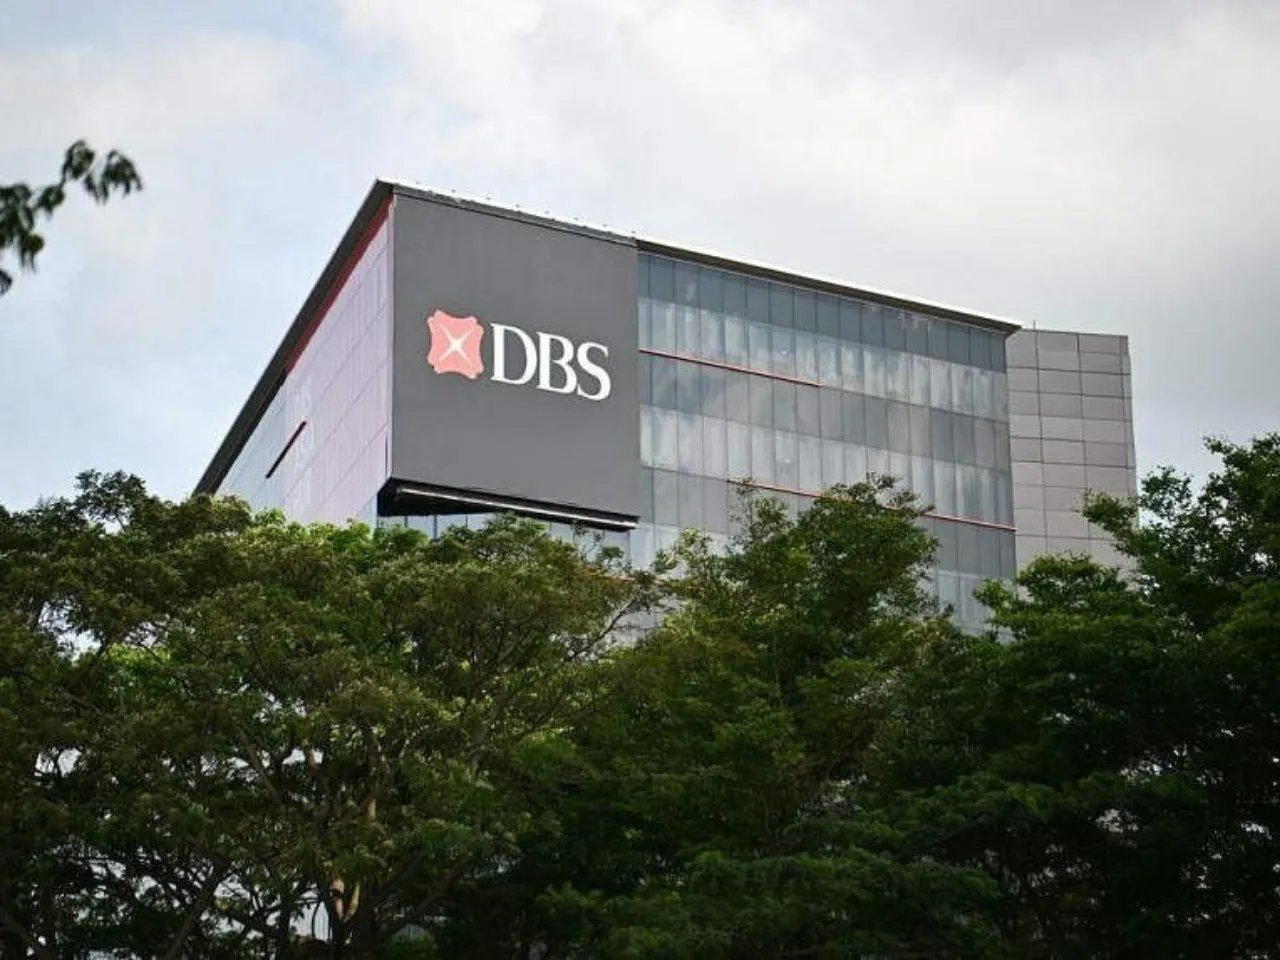 Infor Nexus partners with DBS Bank to enable pre-shipment finance for SMEs